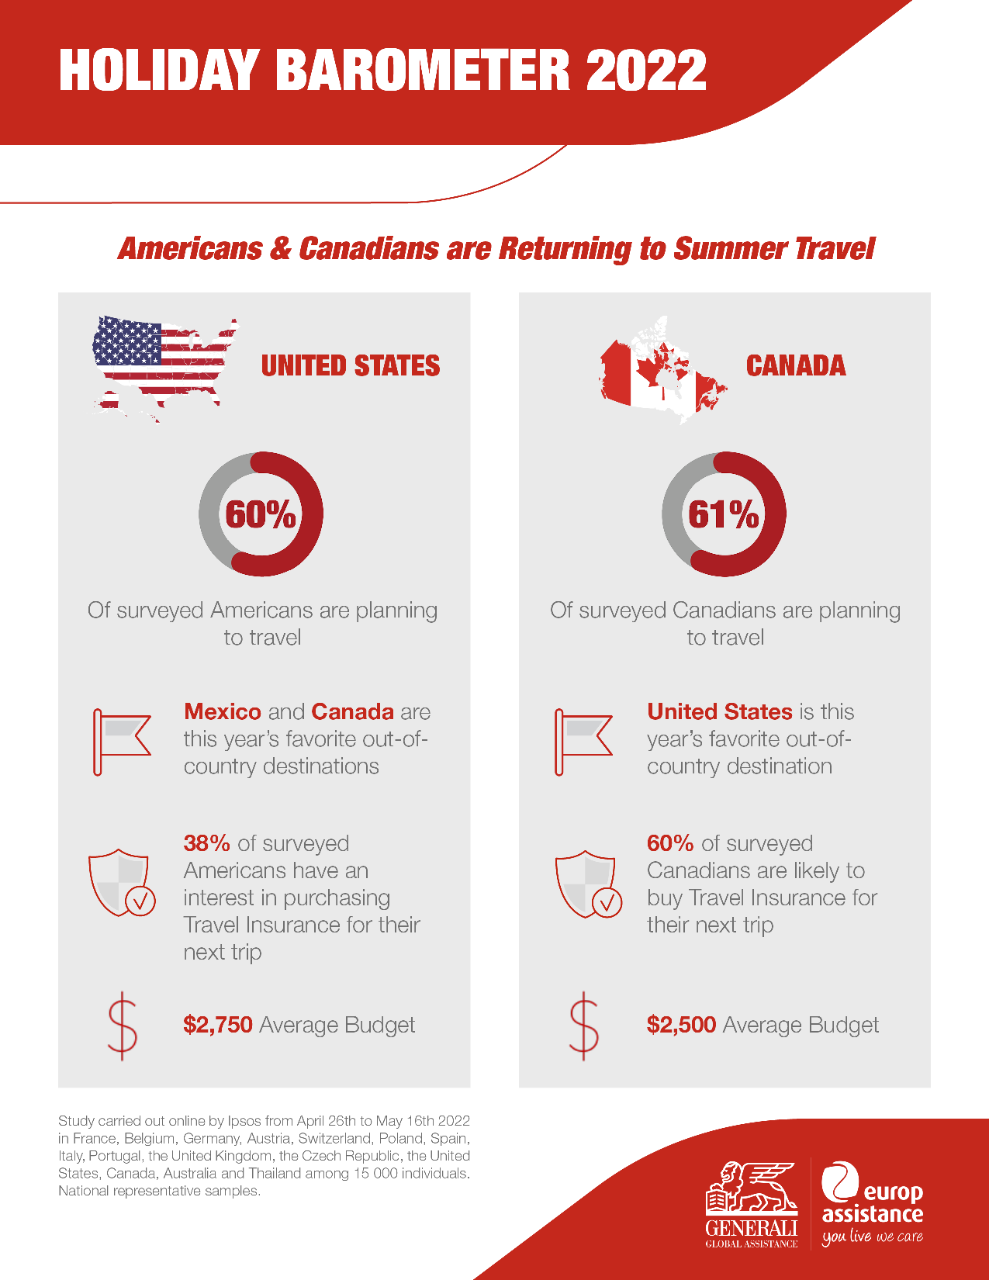 Holiday Barometer 2022 infographic